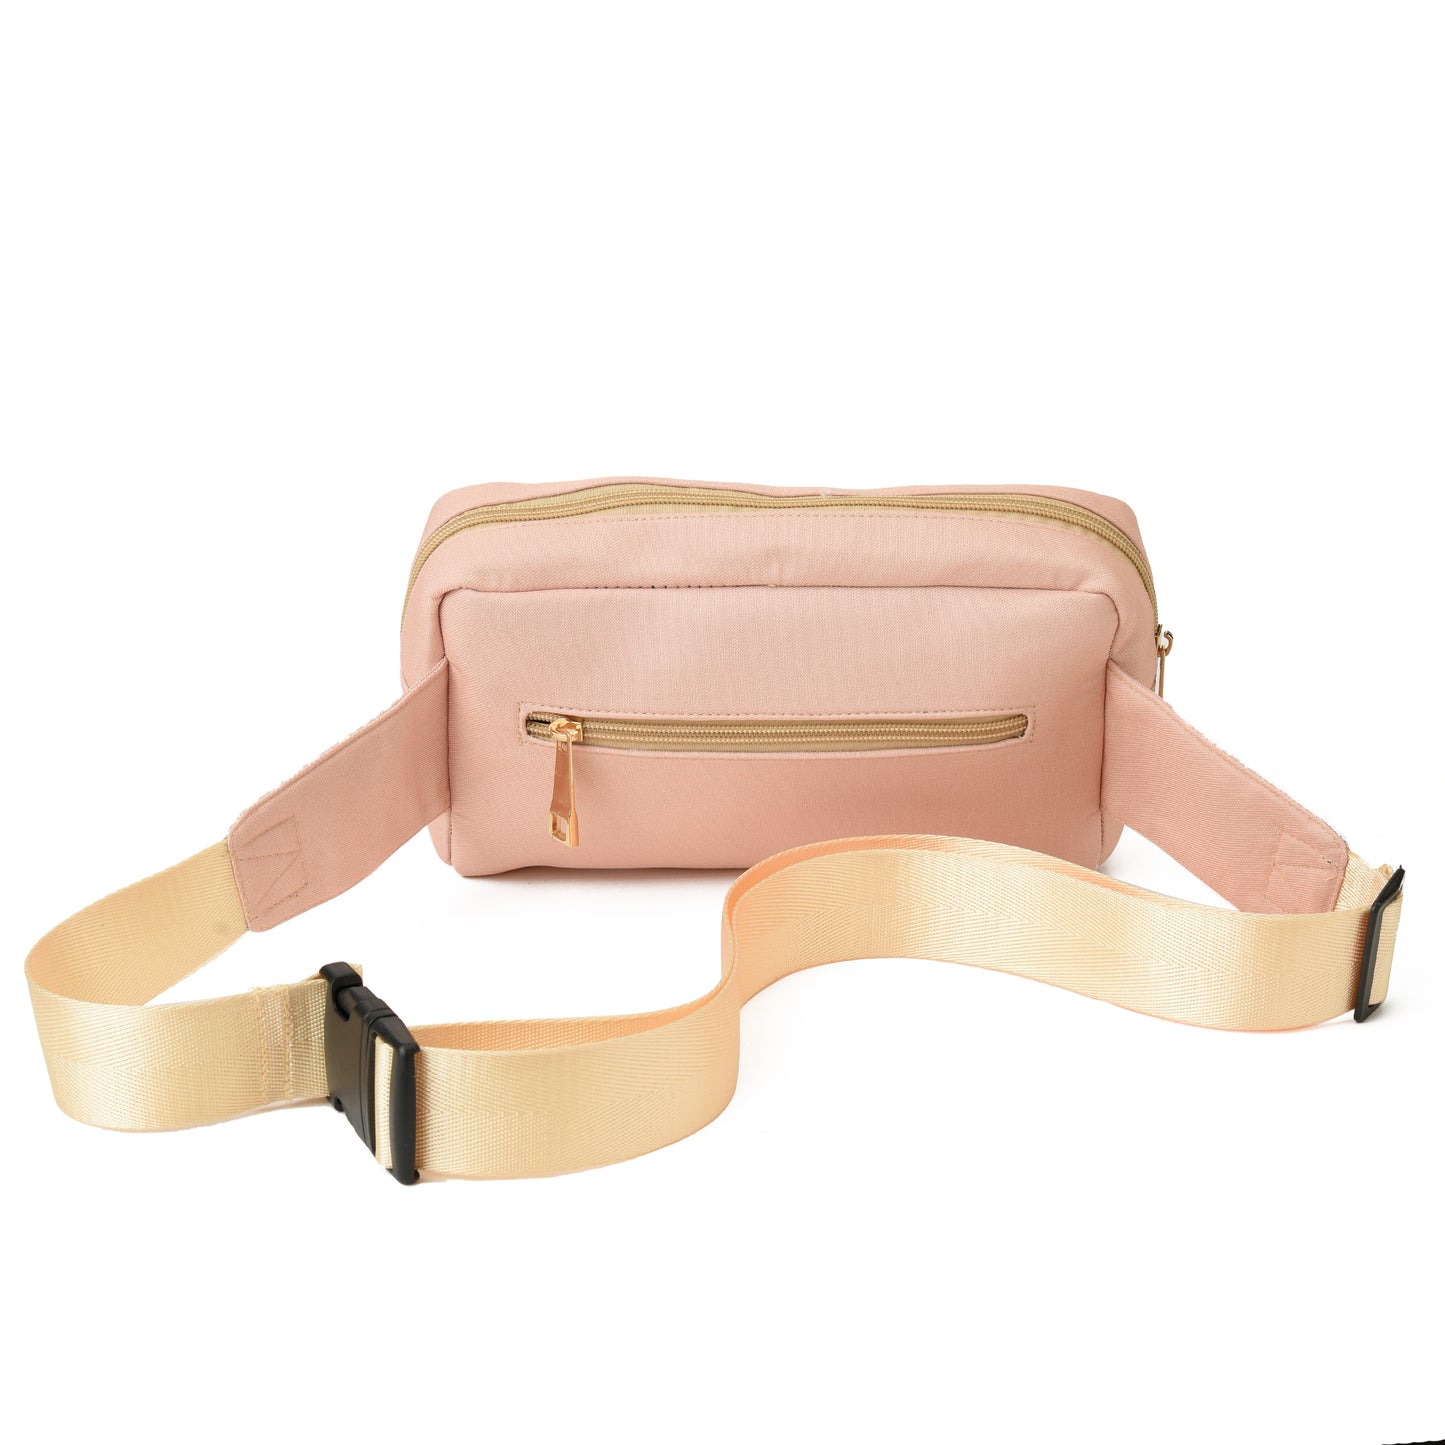 Fanny pack Patch Beige